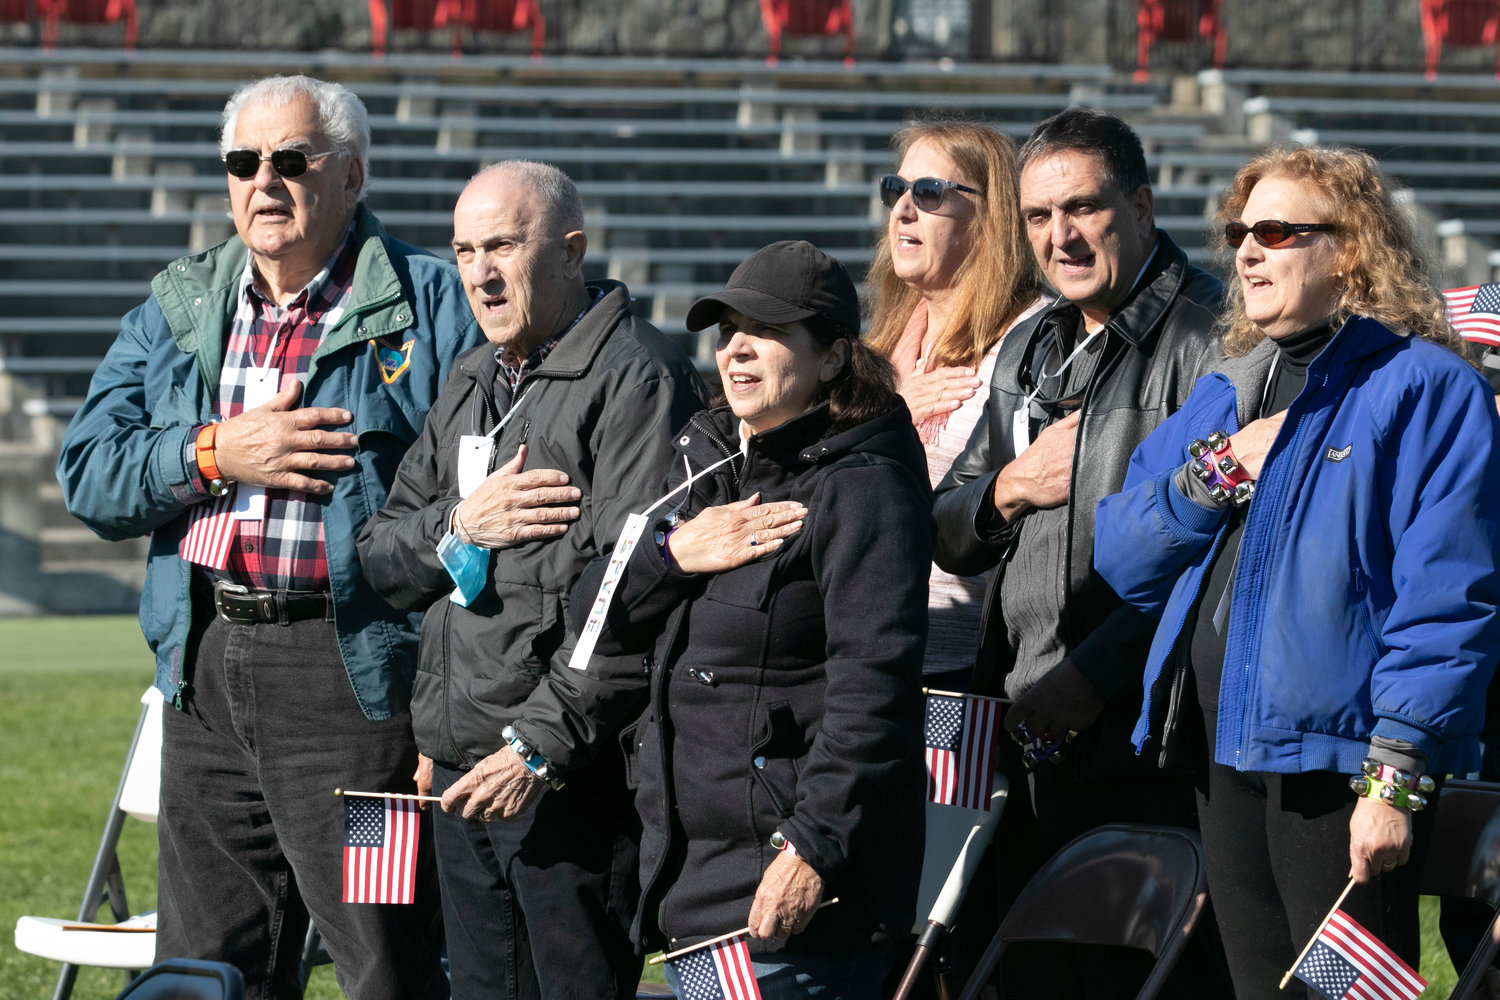 Edward Silva, Frank G. Silva Jr., Janice Abatiello, (front row, left to right) Martha Brown, Lucas Silva and Jean Saylor (back row, left to right) attend the East Providence Veterans Expressway rededication ceremony in honor of their late uncle Corporal Manuel Gonsalves Silva, WWII, Army. Cpl. Silva died at the Battle of Saint-Lô in France in July 1944. Bridge No. 4 over Interstate 195 is named in his memory.